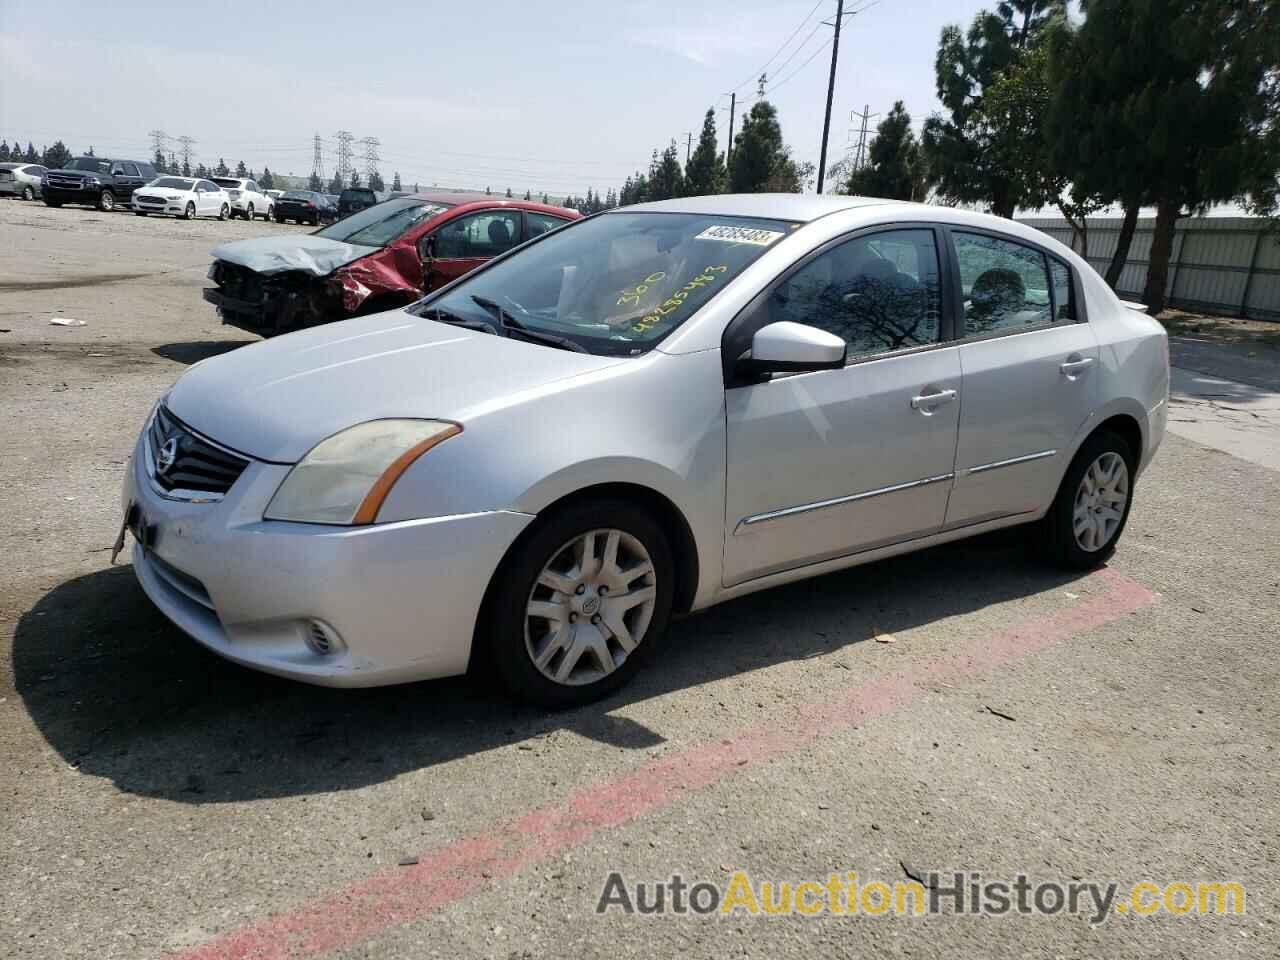 2012 NISSAN SENTRA 2.0, 3N1AB6APXCL746883